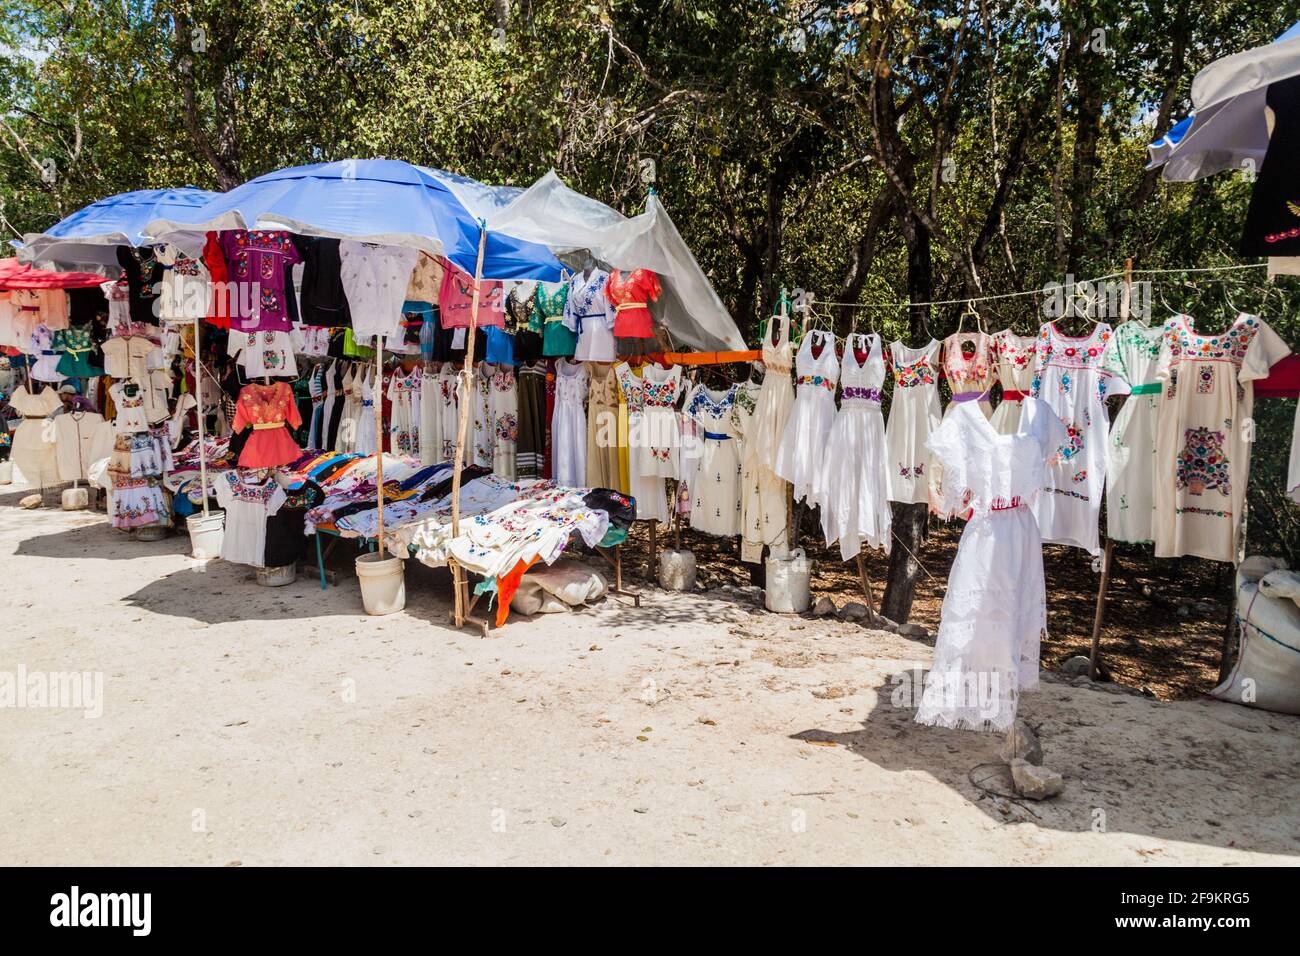 Souvenir stall at the archeological site Chichen Itza, Mexico Stock Photo